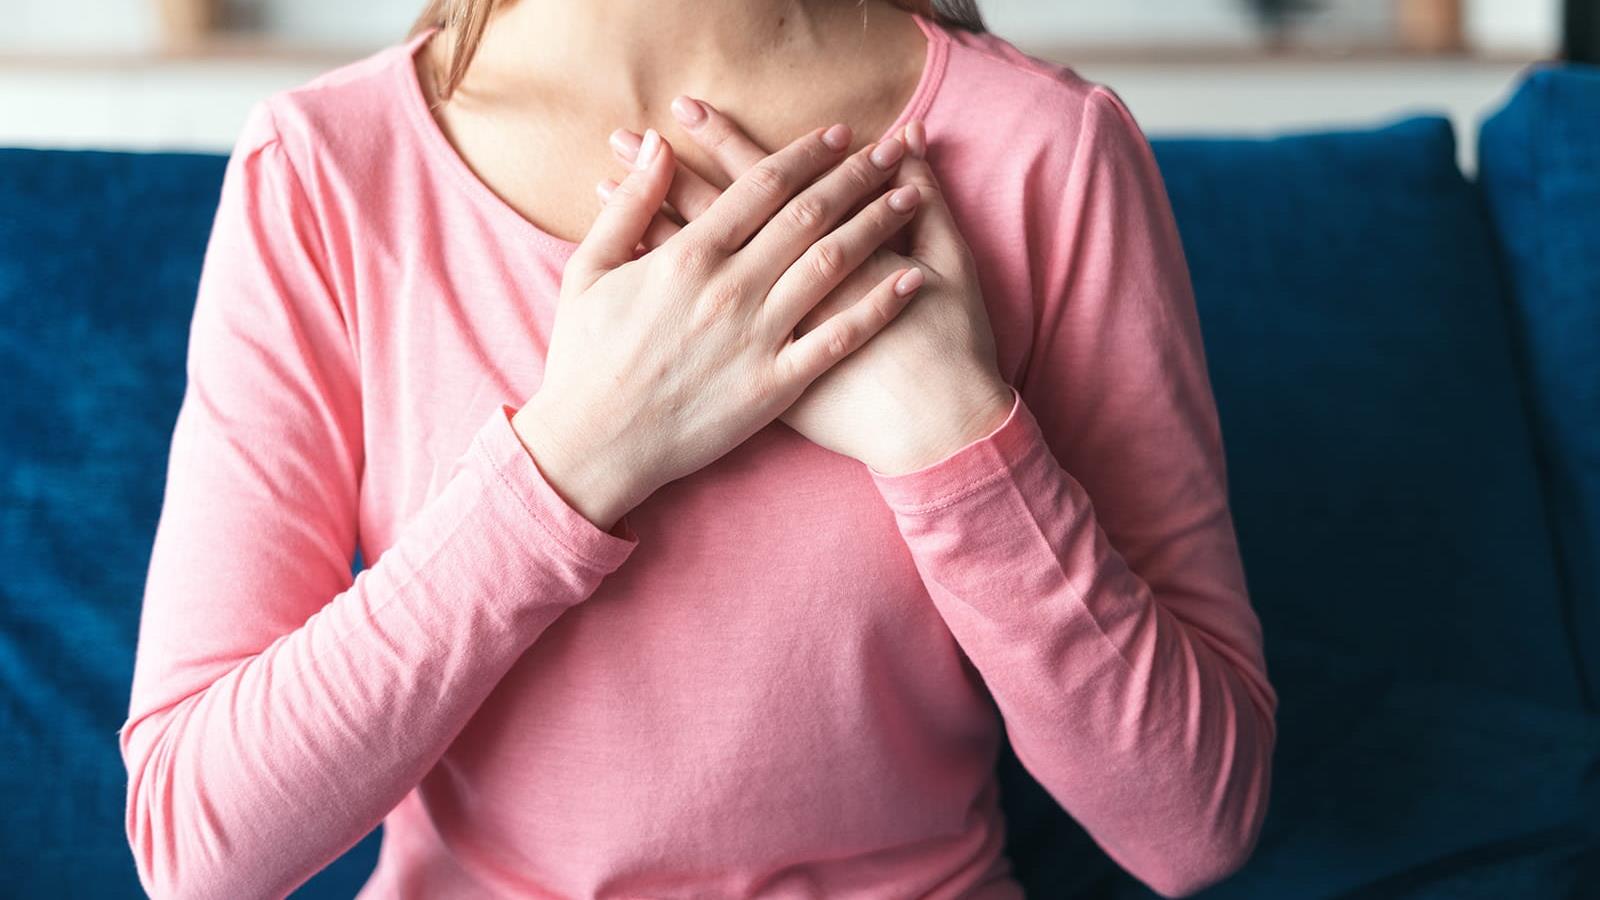 woman in pink shirt with her hands resting on her chest over her heart